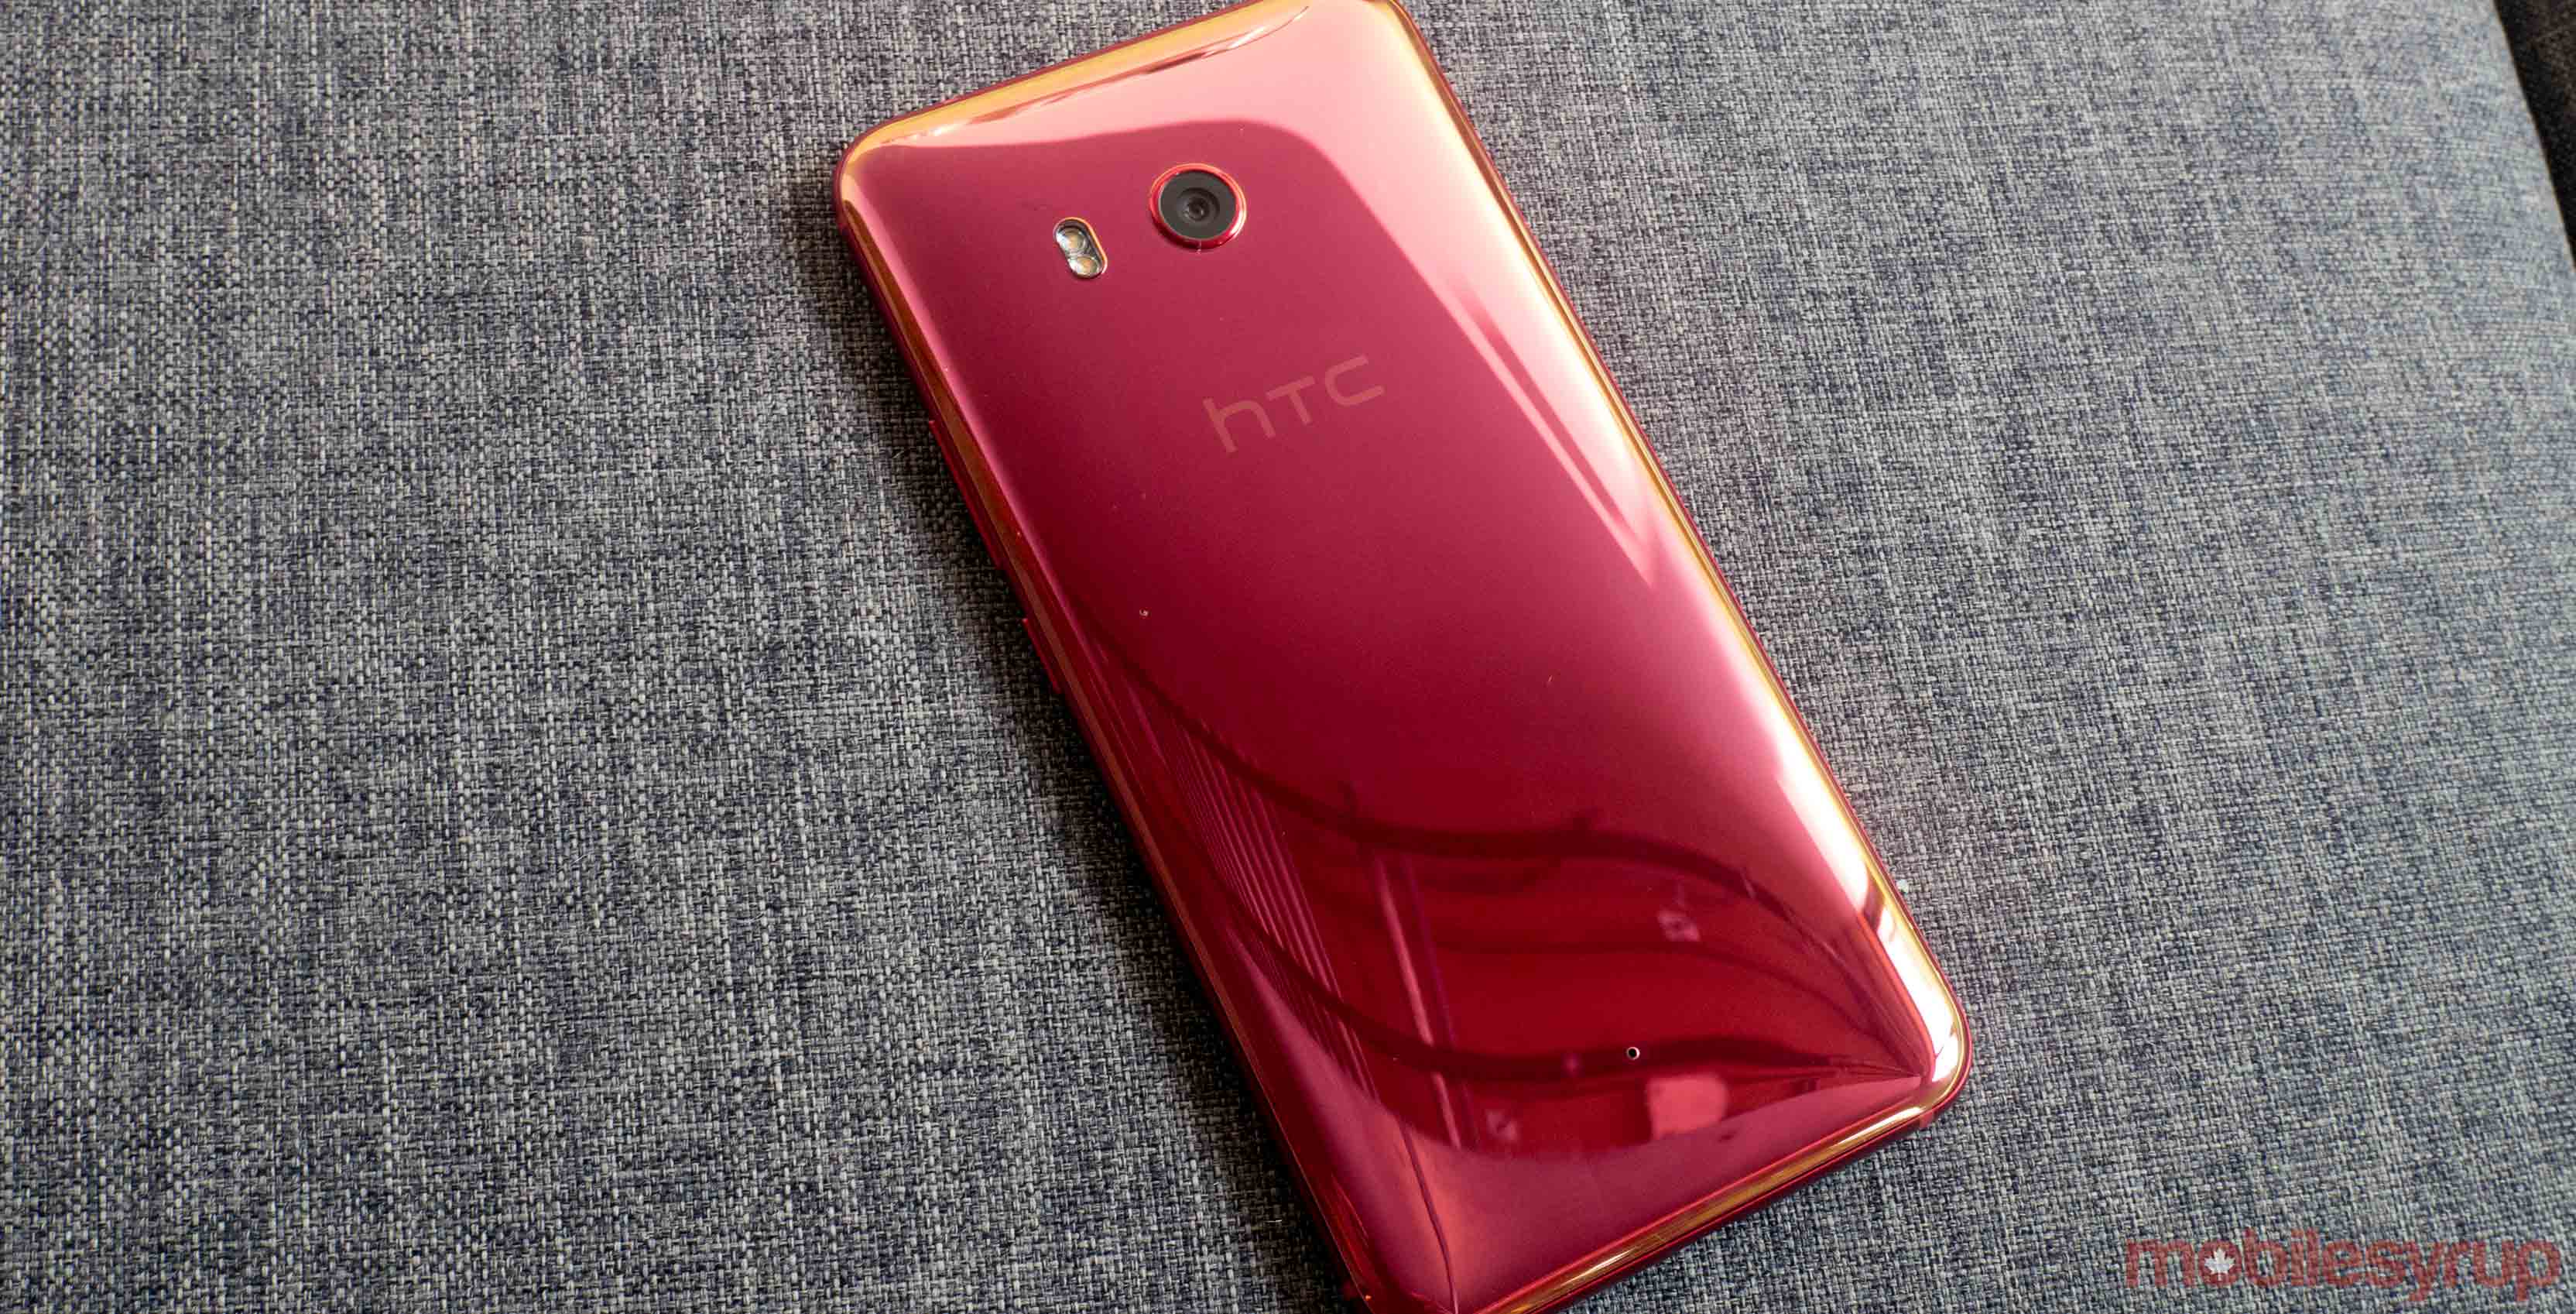 Shot of the back of the HTC U11 and its camera